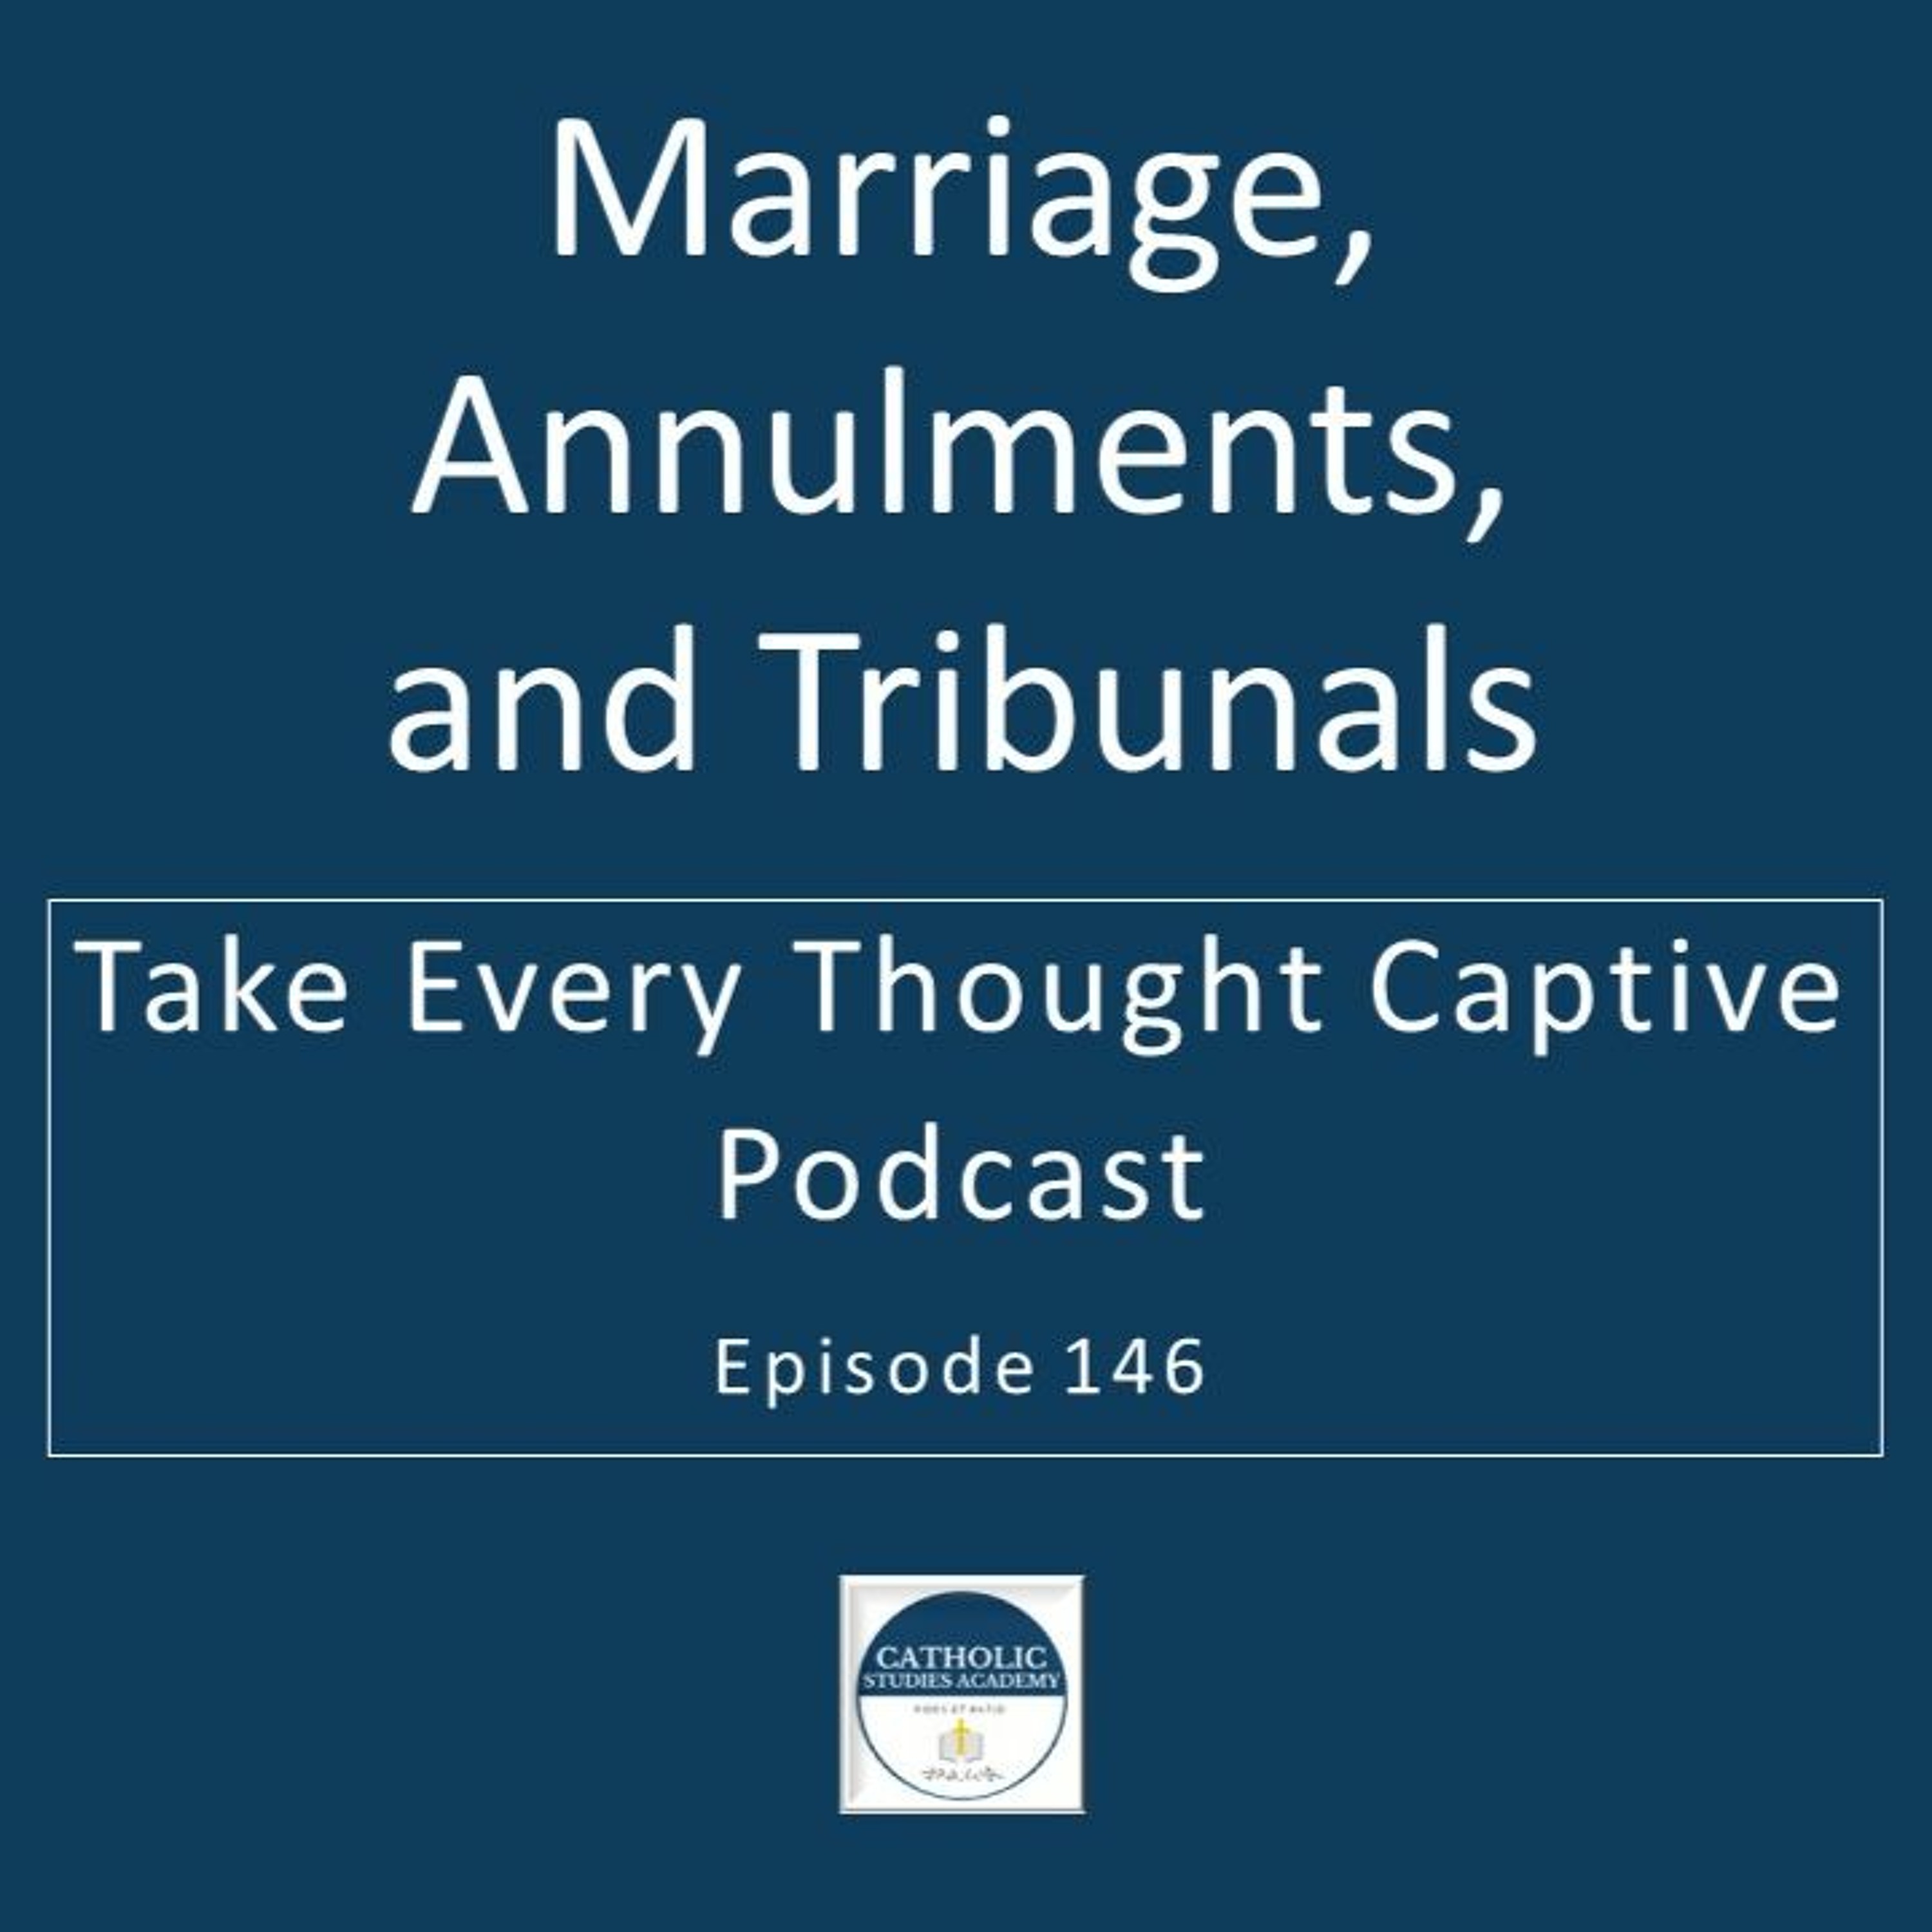 Marriage, Annulments, and Tribunals